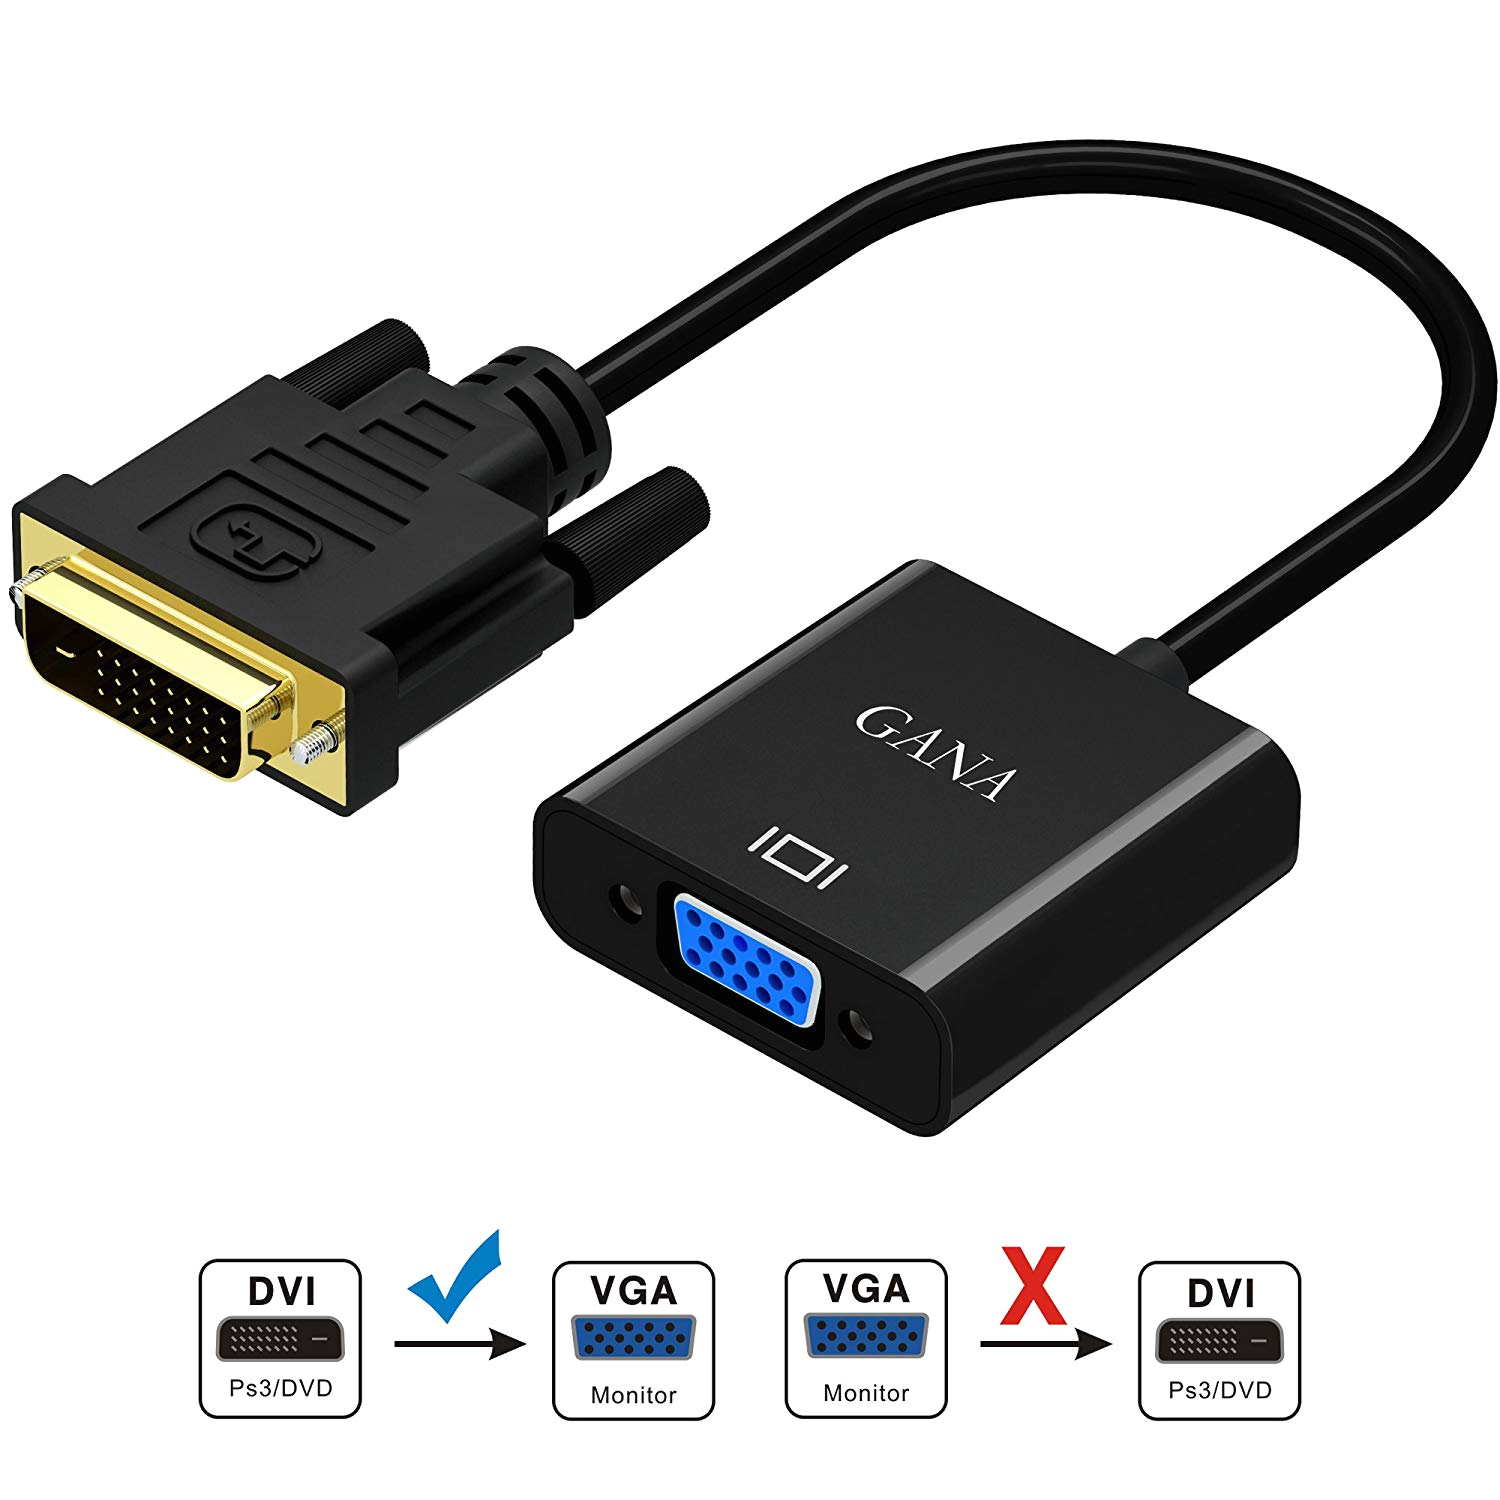 dvi to vga adapter gana 1080p active dvi d to vga adapter converter 24 1 male to female supporting 60hz and 3d for dvi systems to connect to vga displays